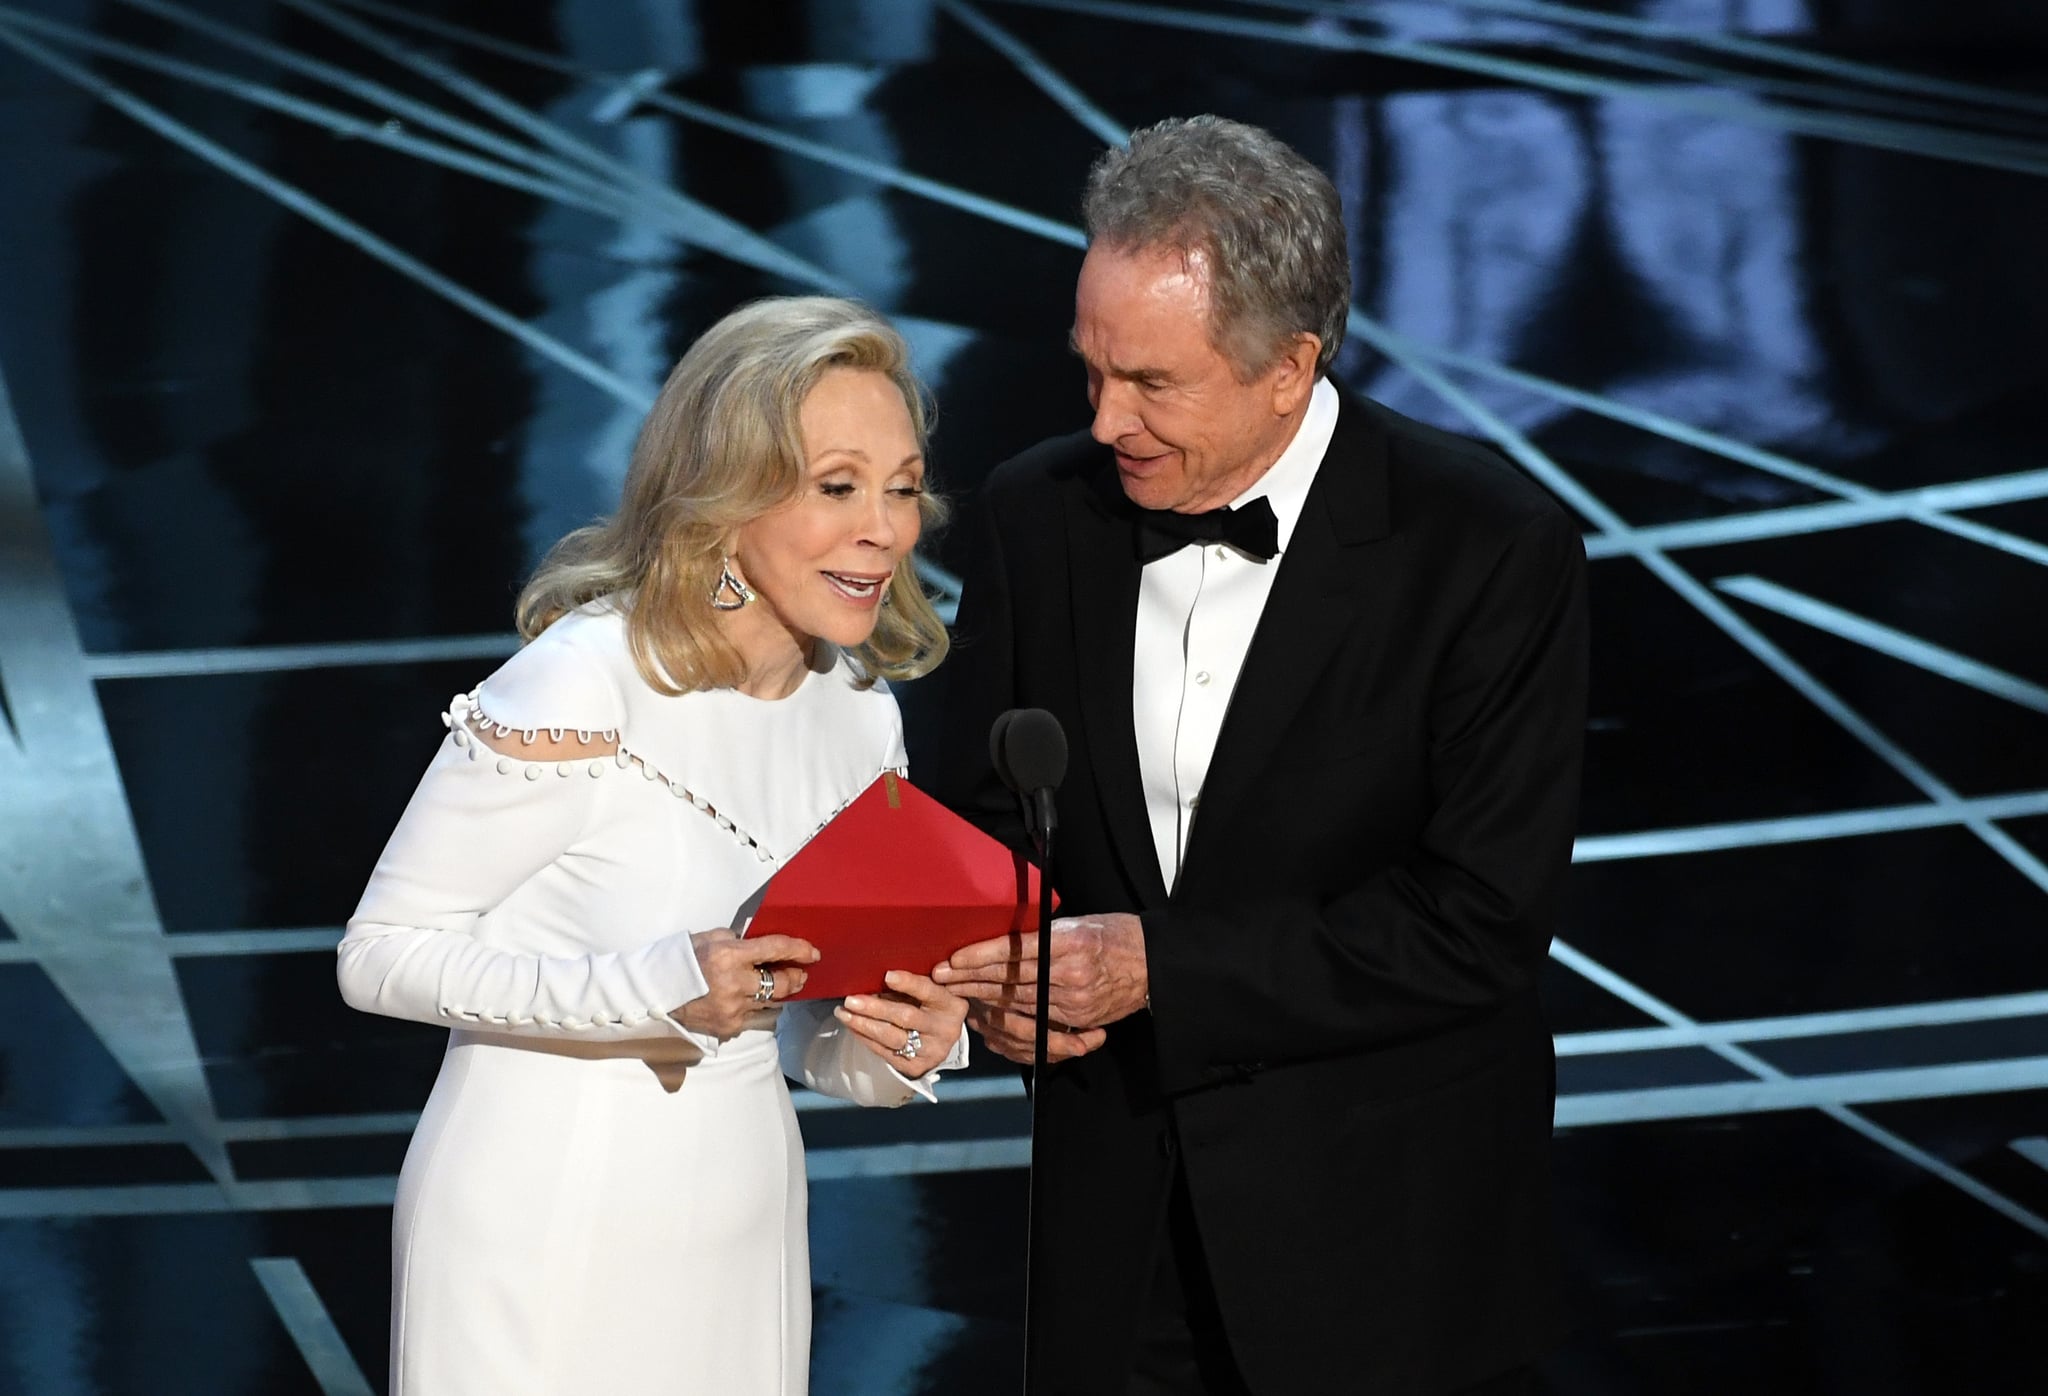 HOLLYWOOD, CA - FEBRUARY 26:  Actors Faye Dunaway (L) and Warren Beatty speak onstage during the 89th Annual Academy Awards at Hollywood & Highland Center on February 26, 2017 in Hollywood, California.  (Photo by Kevin Winter/Getty Images)